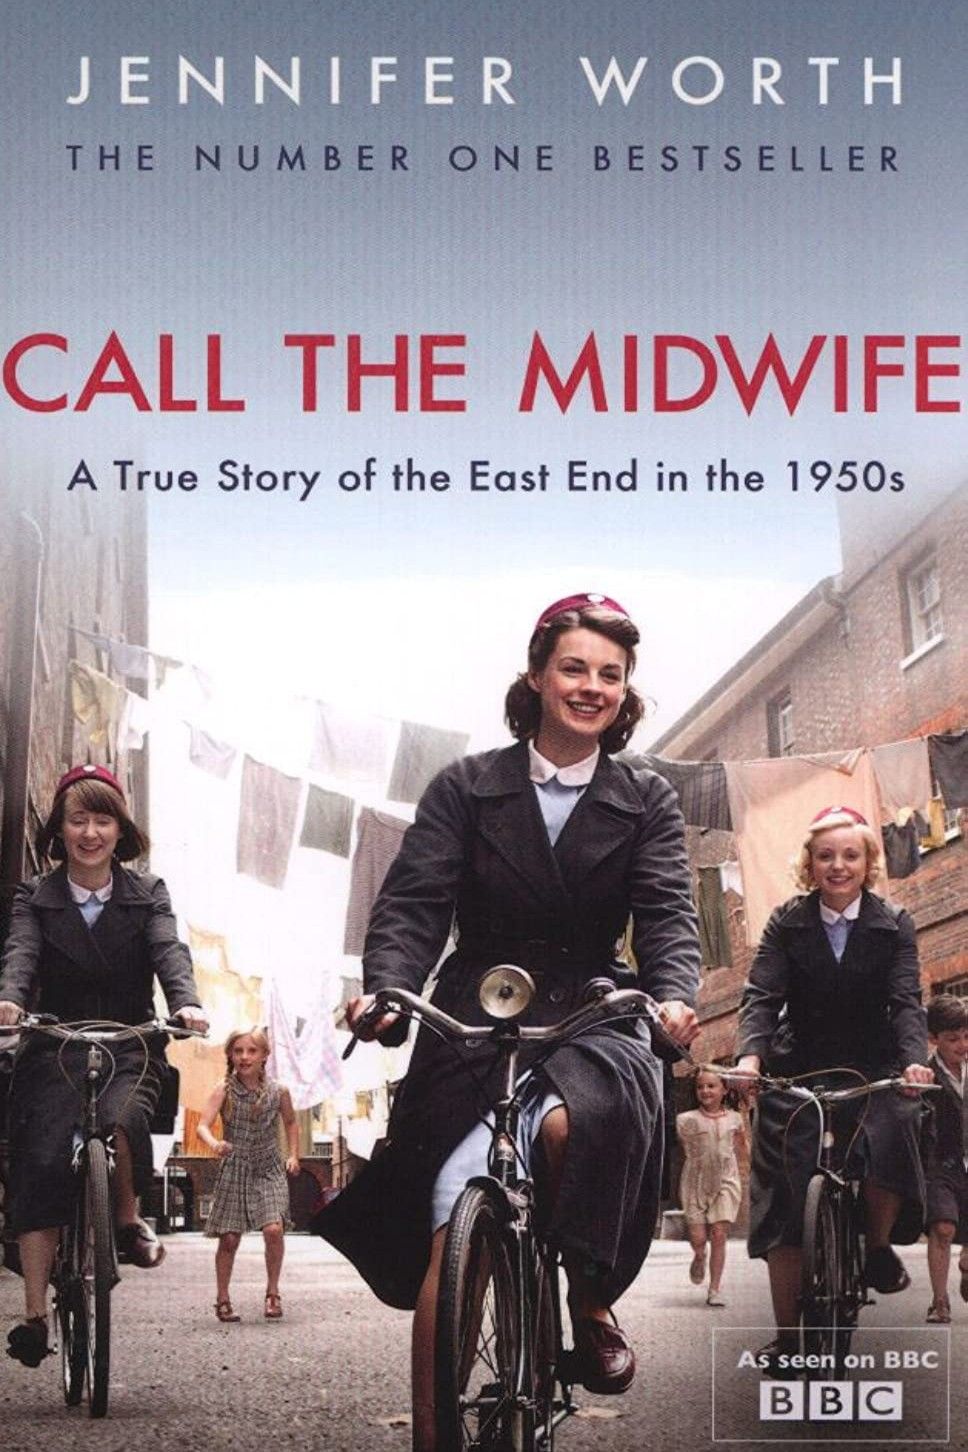 Every Call The Midwife Christmas Episode, Ranked Worst To Best